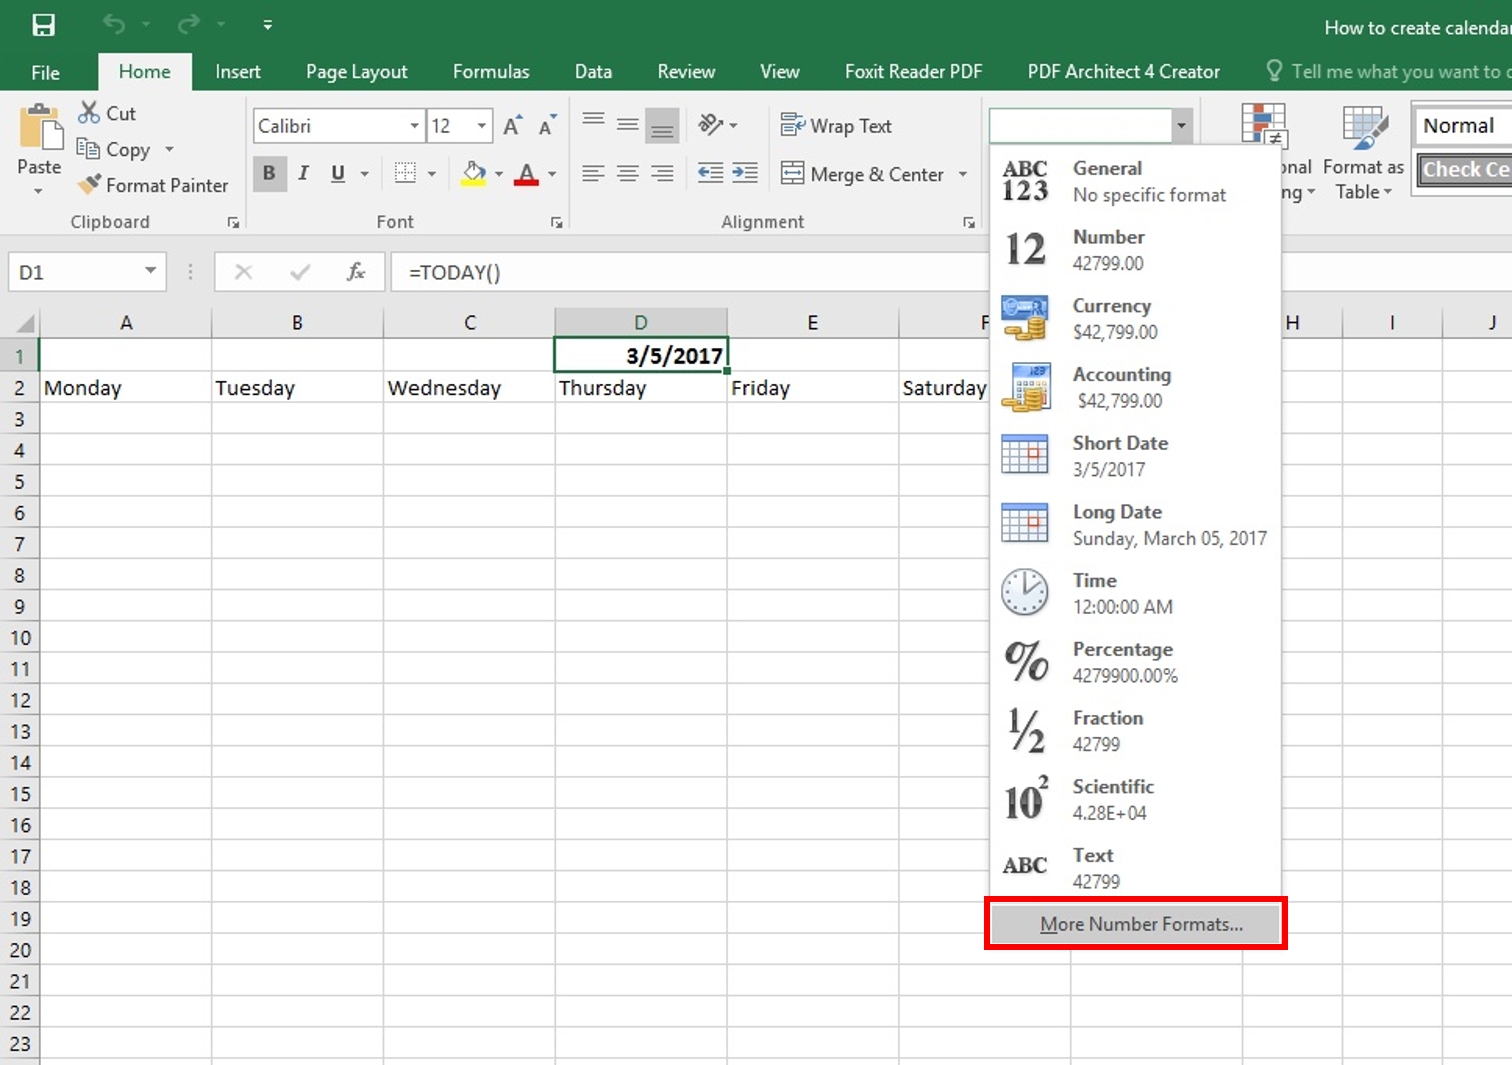 How To Create A Calendar In Excel | Step By Step Process